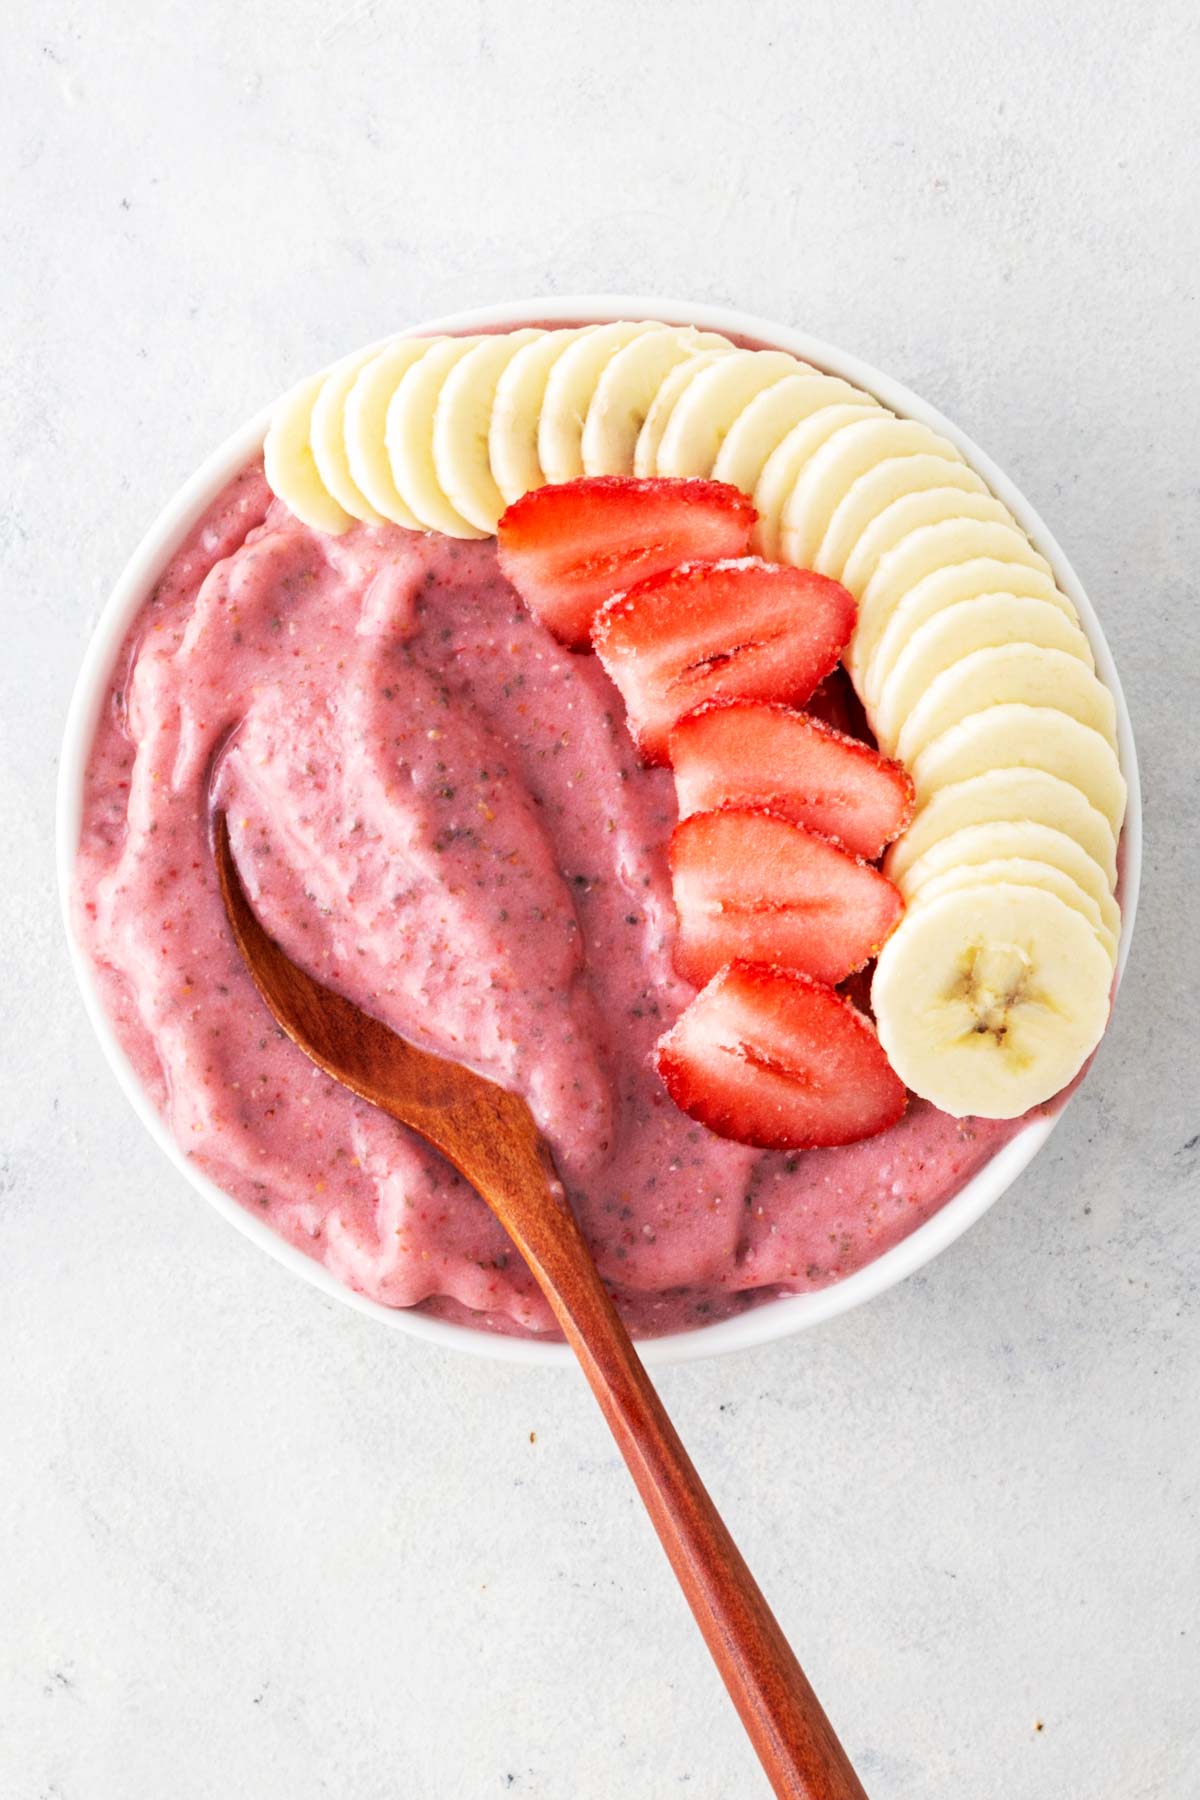 Strawberry banana smoothie bowl on a gray table.